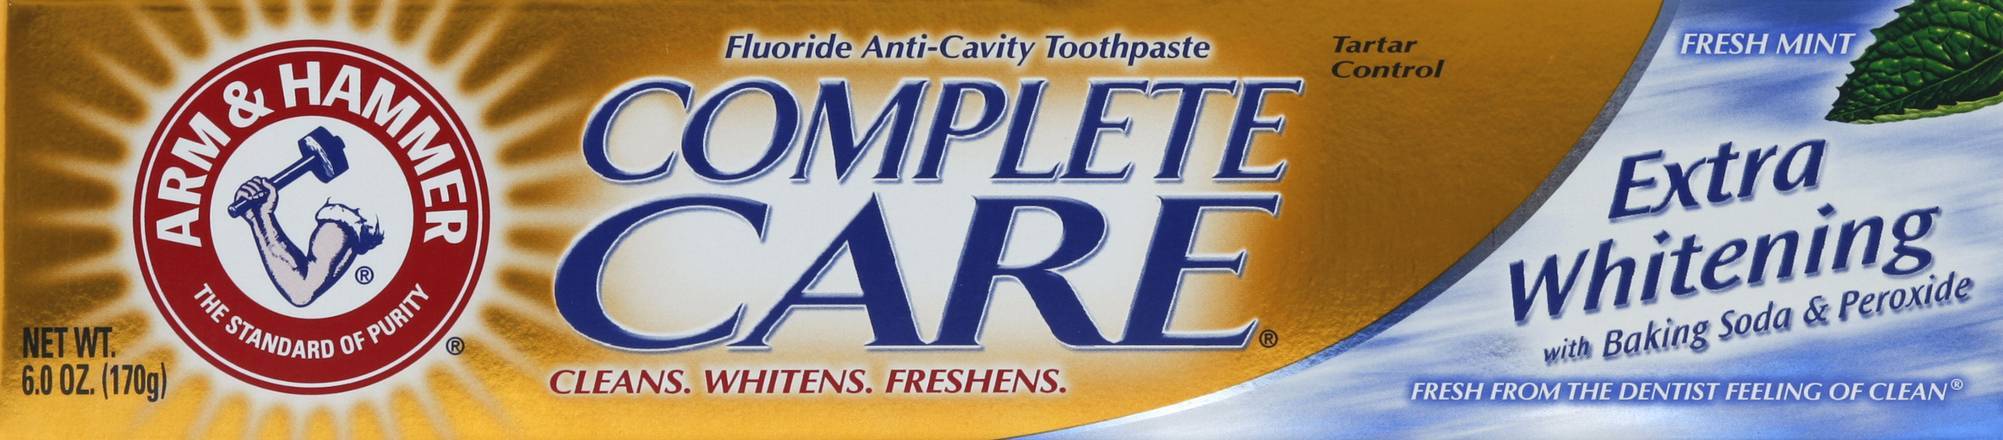 Arm & Hammer Complete Care Fluoride Anticavity Fresh Mint Toothpaste